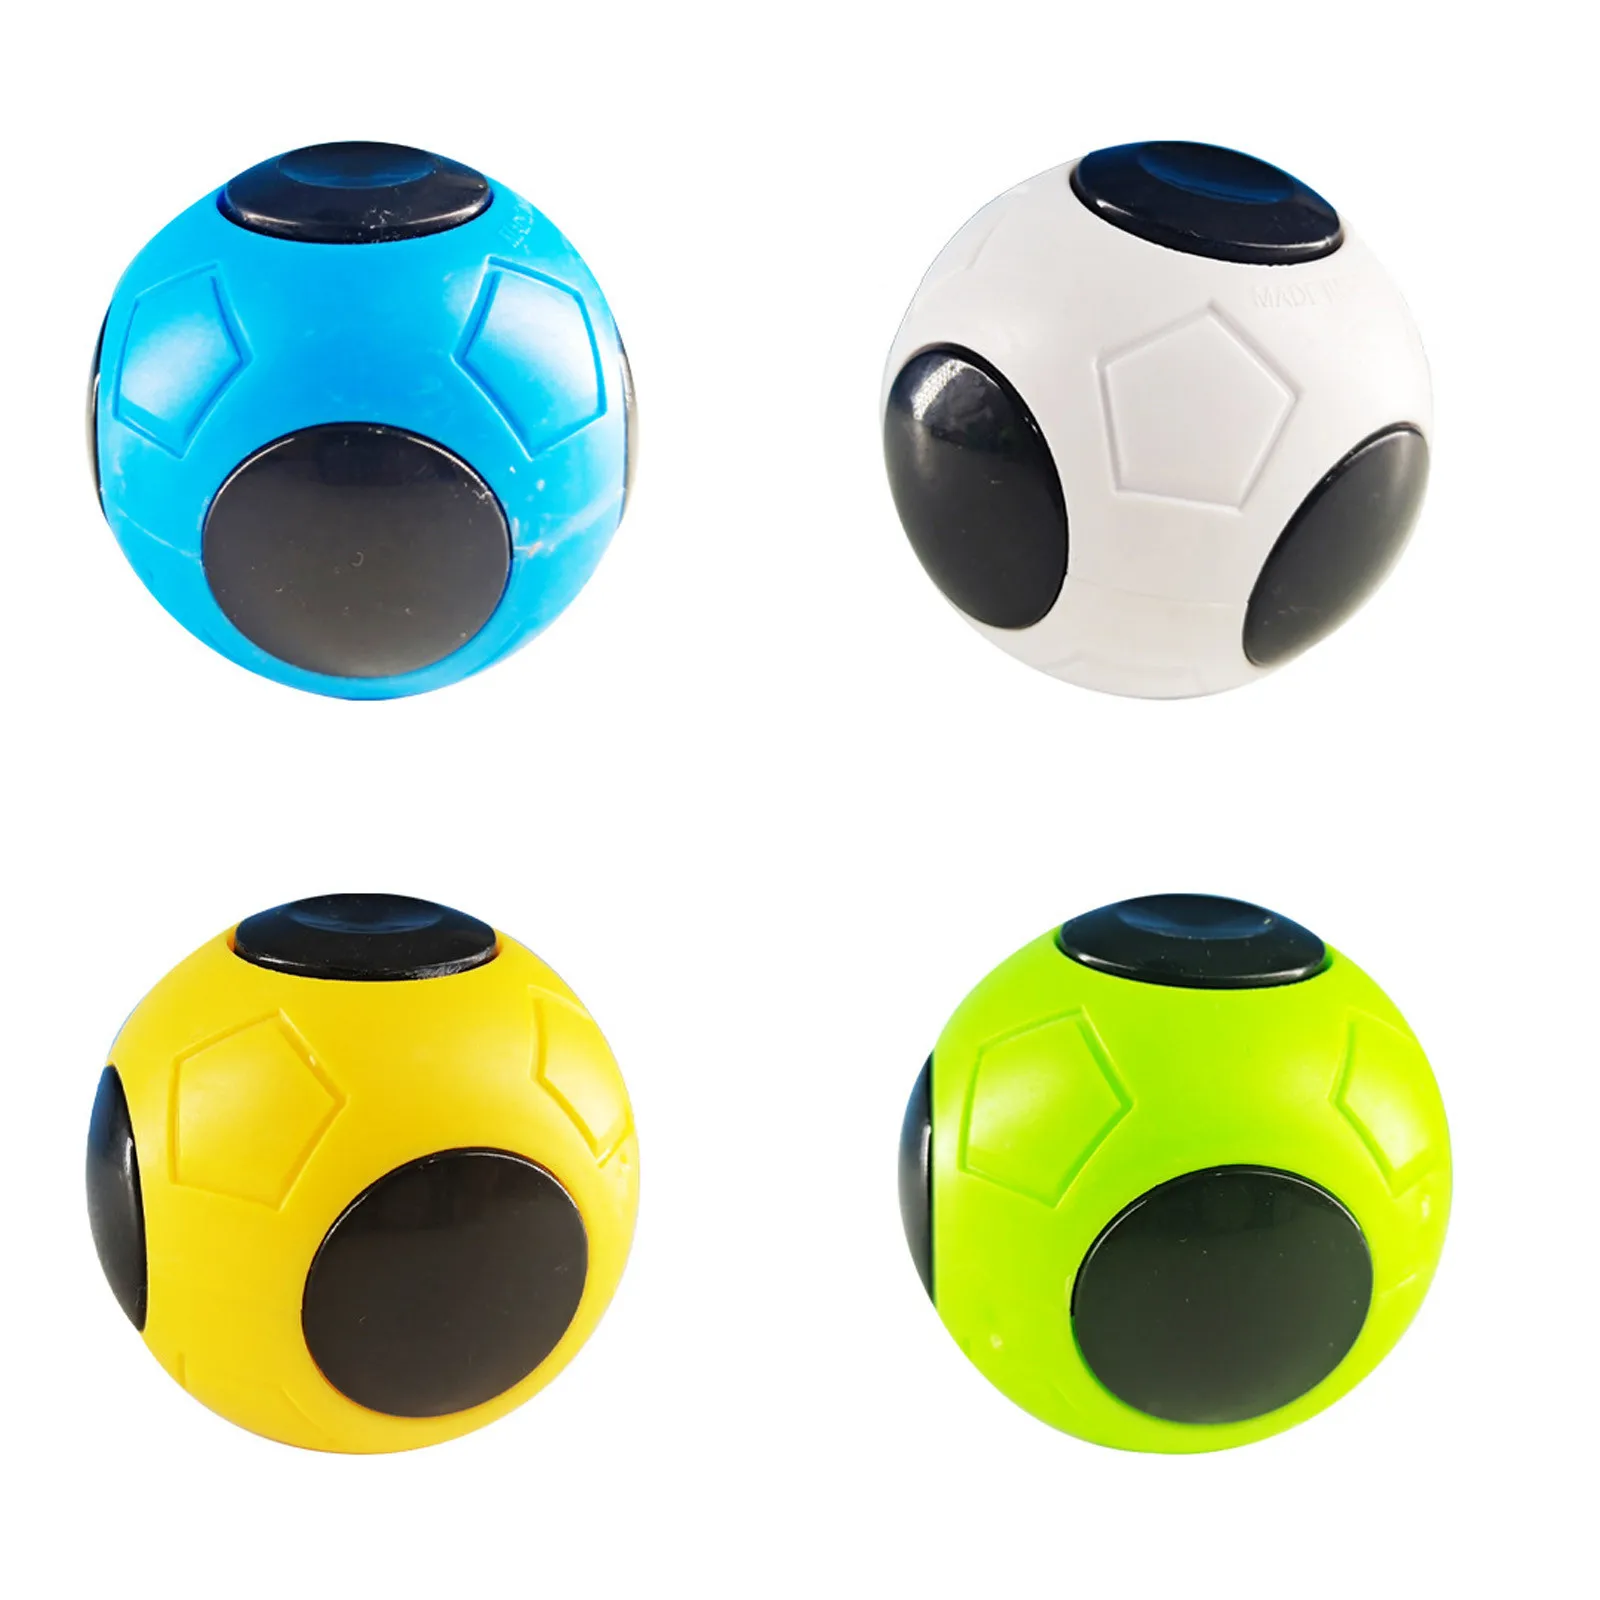 

6CM Decompression Slow R Ebound Toy Fingertip Football Cheap Sensory Relieves Stress Anxiety For Kid Simple Dimple Fidget Toy